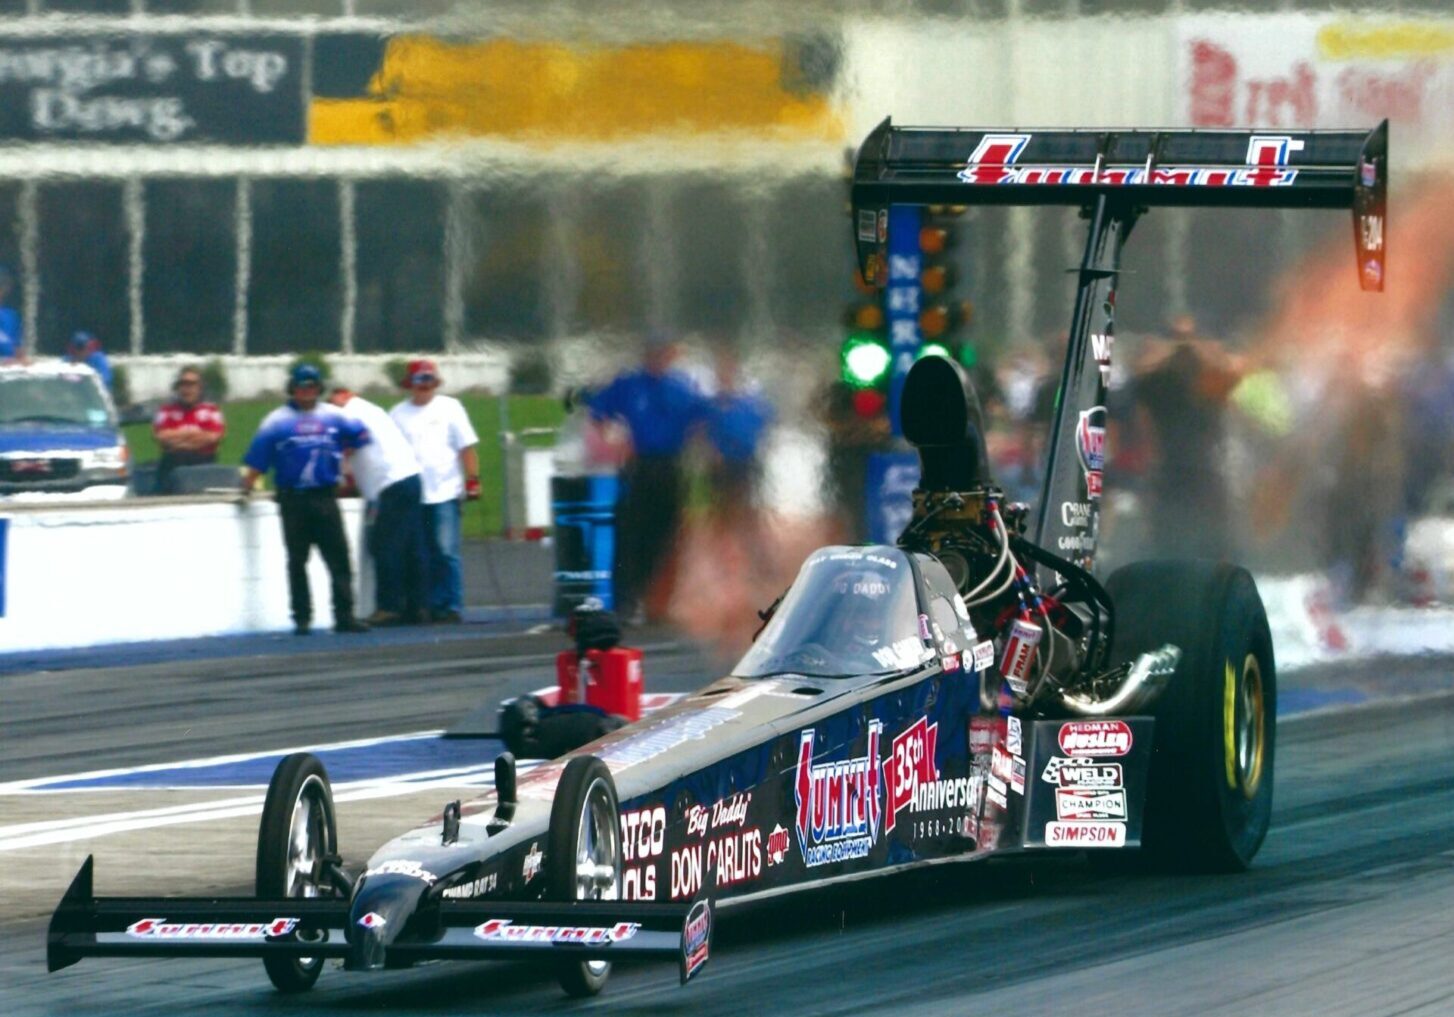 The most advanced design Top Fuel dragster ever designed, built by Murf McKinney and Garlits in 1992, SR 34 was campaigned from 1993-1994 with Bruce Larsen and Richard Langson driving. SR 34 was stored till 2002, brought out of retirement, refurbished with a new engine and drive train and campaigned in 2002 and 2003 with Big Daddy driving. Don drove a blistering quarter mile at 323.04 MPH at the NHRA 2003 Gatornationals, a 318.54 at the 2002 US Nationals and a 319 MPH at 4.73 seconds at the 2003 NHRA Southern Nationals in Atlanta. SR 34 gained more MPH from the 1/8th mile to finish line on the 323.04 run than any other top fuel dragster had up to that point.  This proved beyond a show of a doubt, SR 34 aerodynamics superiority.  Of course, NHRA was in the process of slowing the top fuel cars down, so they did not want any of the Mono-Wing cars to be campaigned by the other top fuel teams. SR 34 has enclosed cockpit, extra narrow rear and the aerodynamic “T” tail section, (Mono-Wing). These three things make the car most advanced T/F Dragster ever built. 